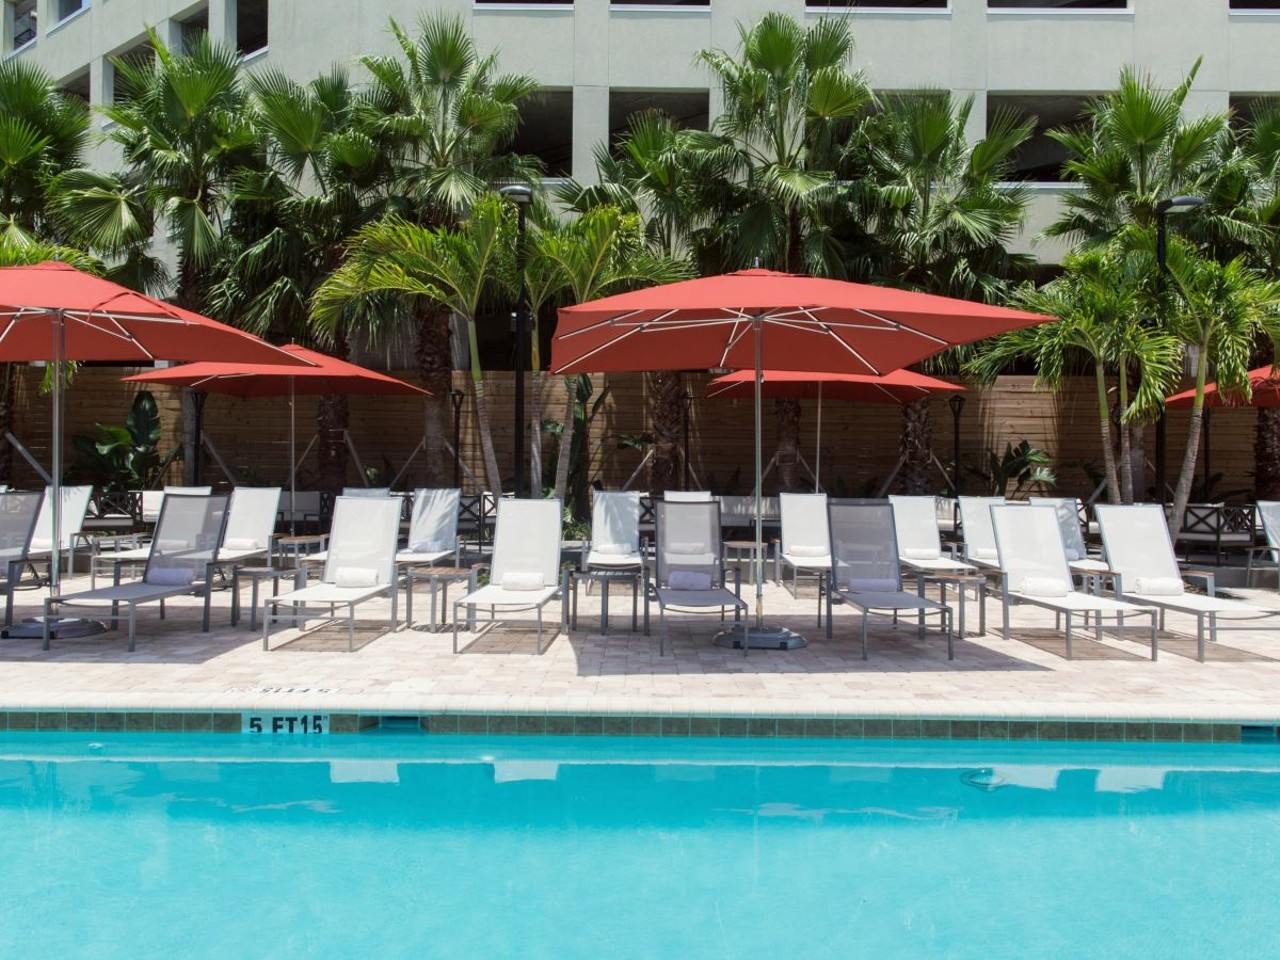 Epicurean Hotel
1207 S Howard Ave., Tampa, 855-829-2536    
$20
Before your night out in SoHo, unwind on a lounger or take a dip for $20 at the Epicurean Hotel. Day passes come with amenities like access to the outdoor heated pool, one reserved lounge chair per ticket, available food and drinks at the newly opened Lobby Bar and complimentary Wi-Fi and self-parking. Craving a sweet treat? The popular Tampa ice cream chain Chill Bros. is just a minute-walk from the pool.
Photo via Epicurean Hotel, Autograph Collection/Facebook